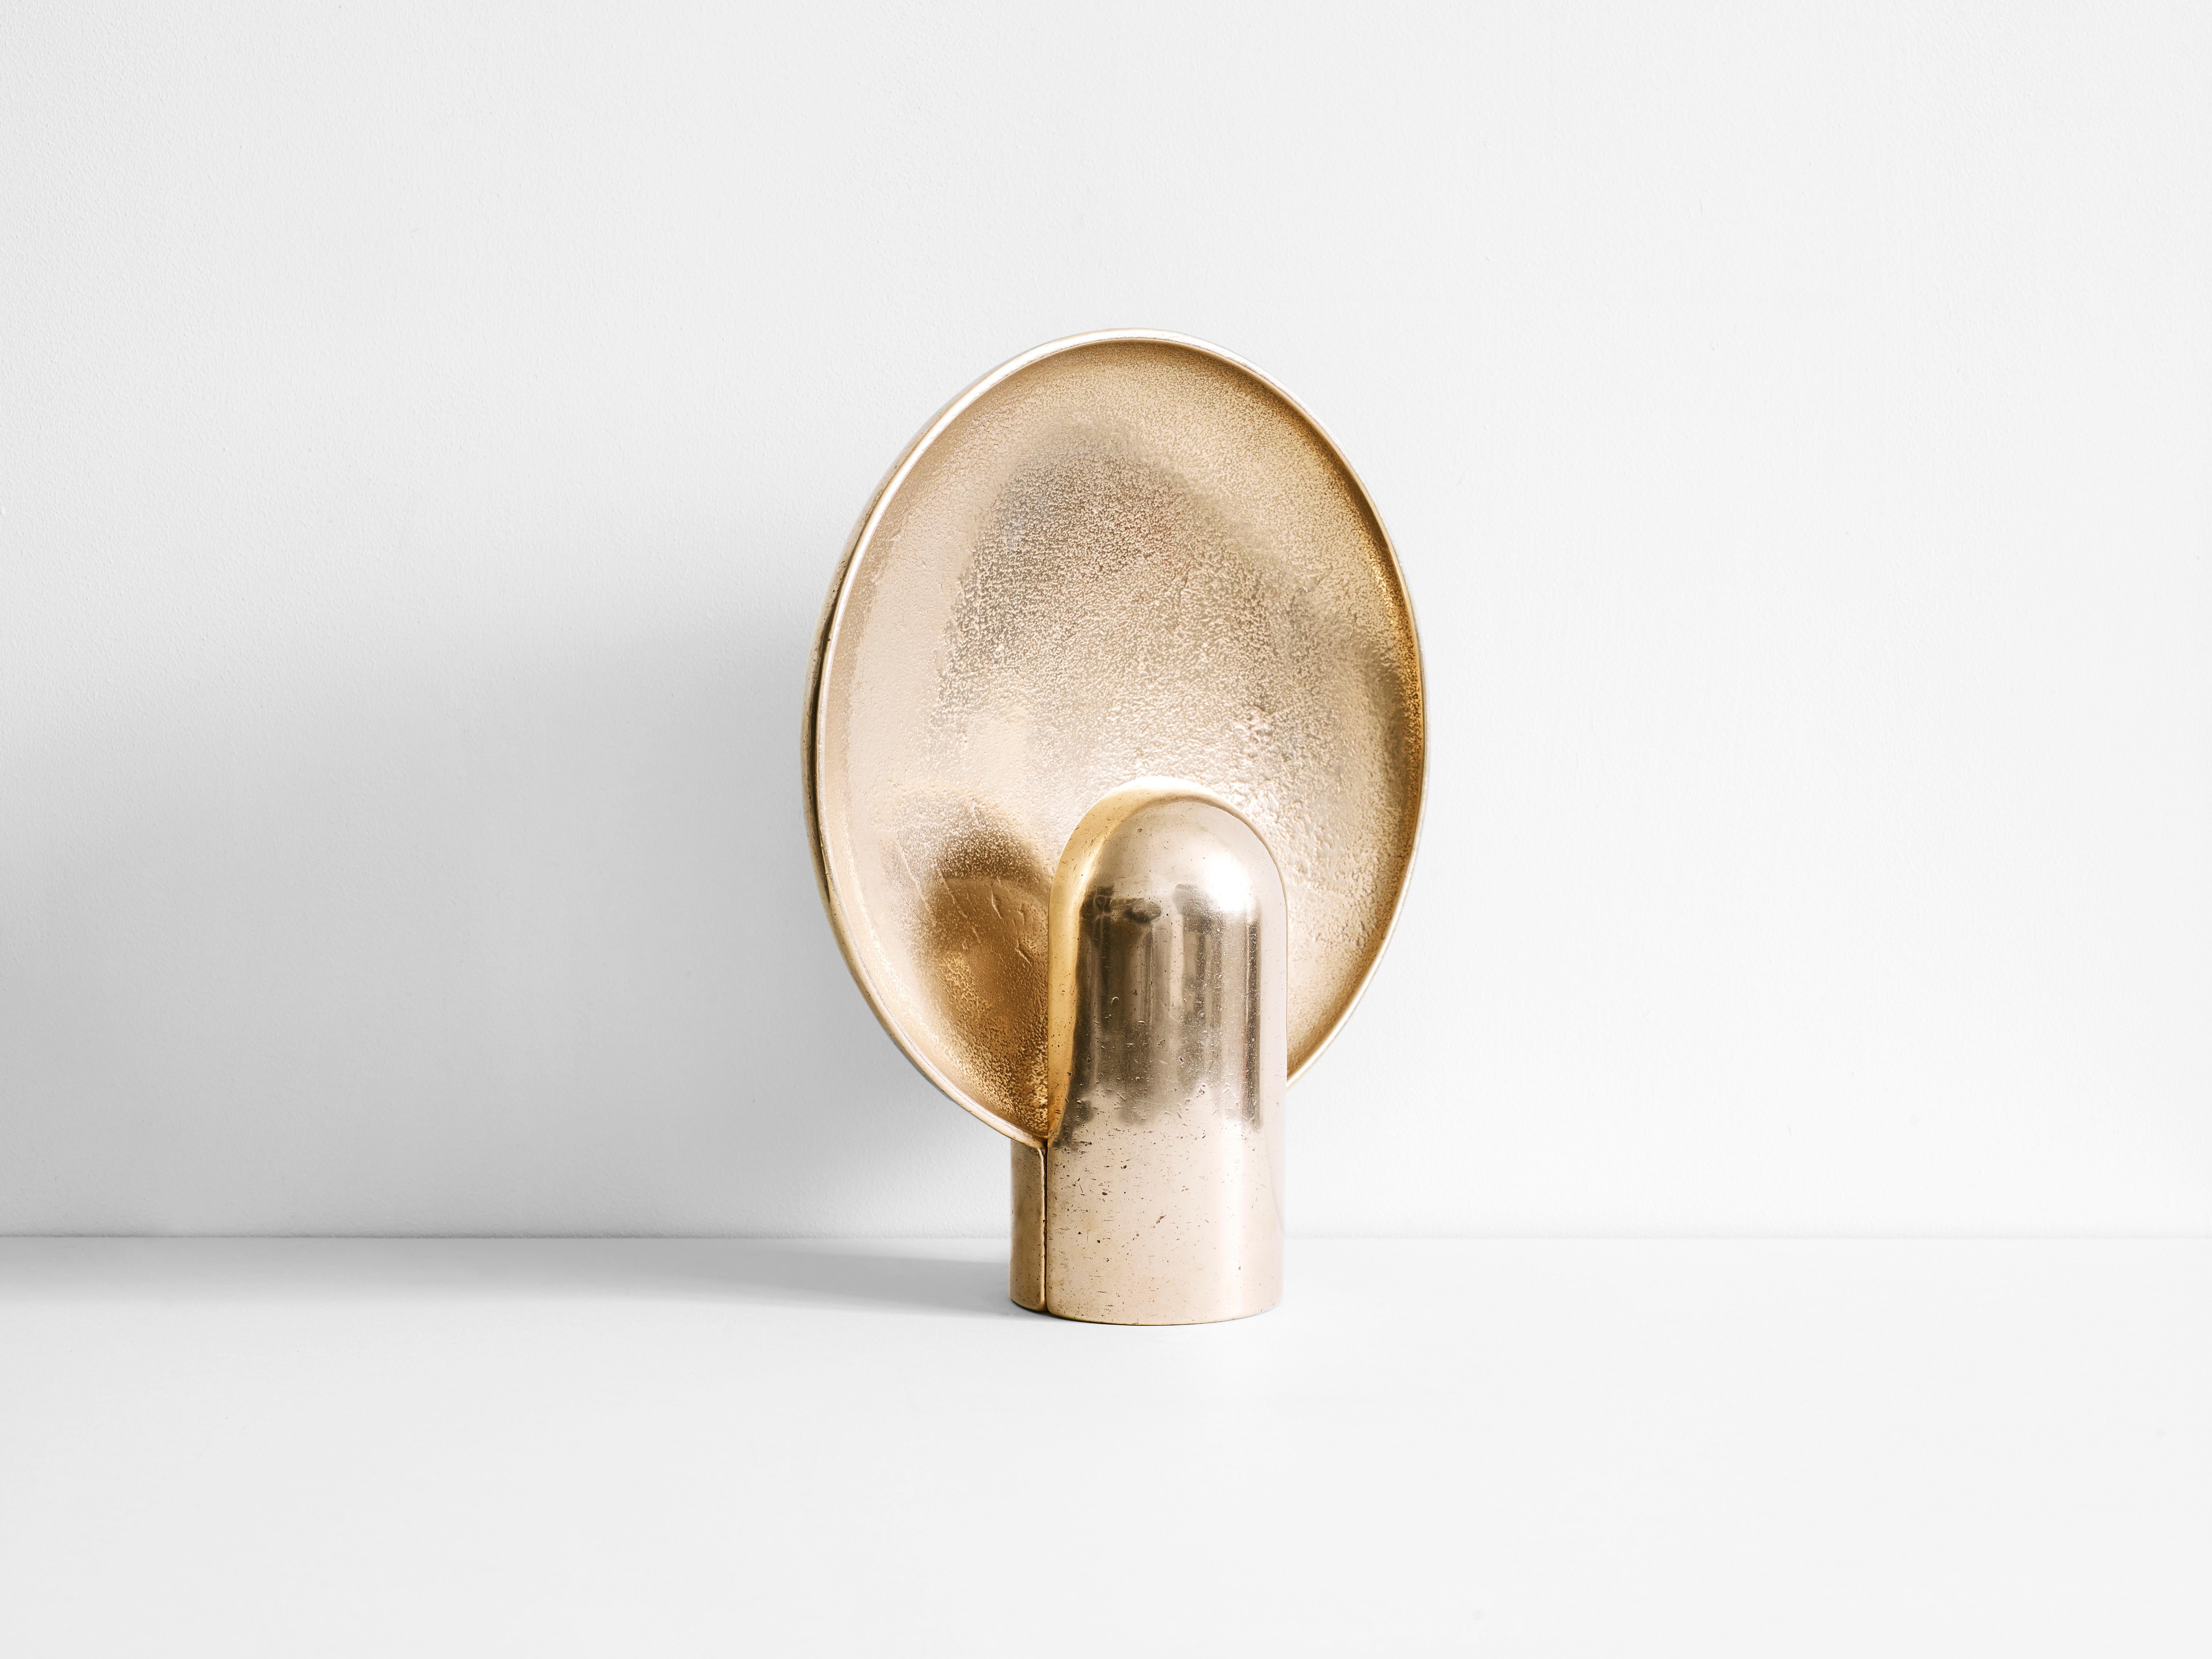 This sculptural item is handmade in Sydney Australia.
Also available in different stones.

The surface sconce is a ambient, sculptural light cast in two halves from solid gunmetal.

Each casting is manufactured in small batches meaning slight